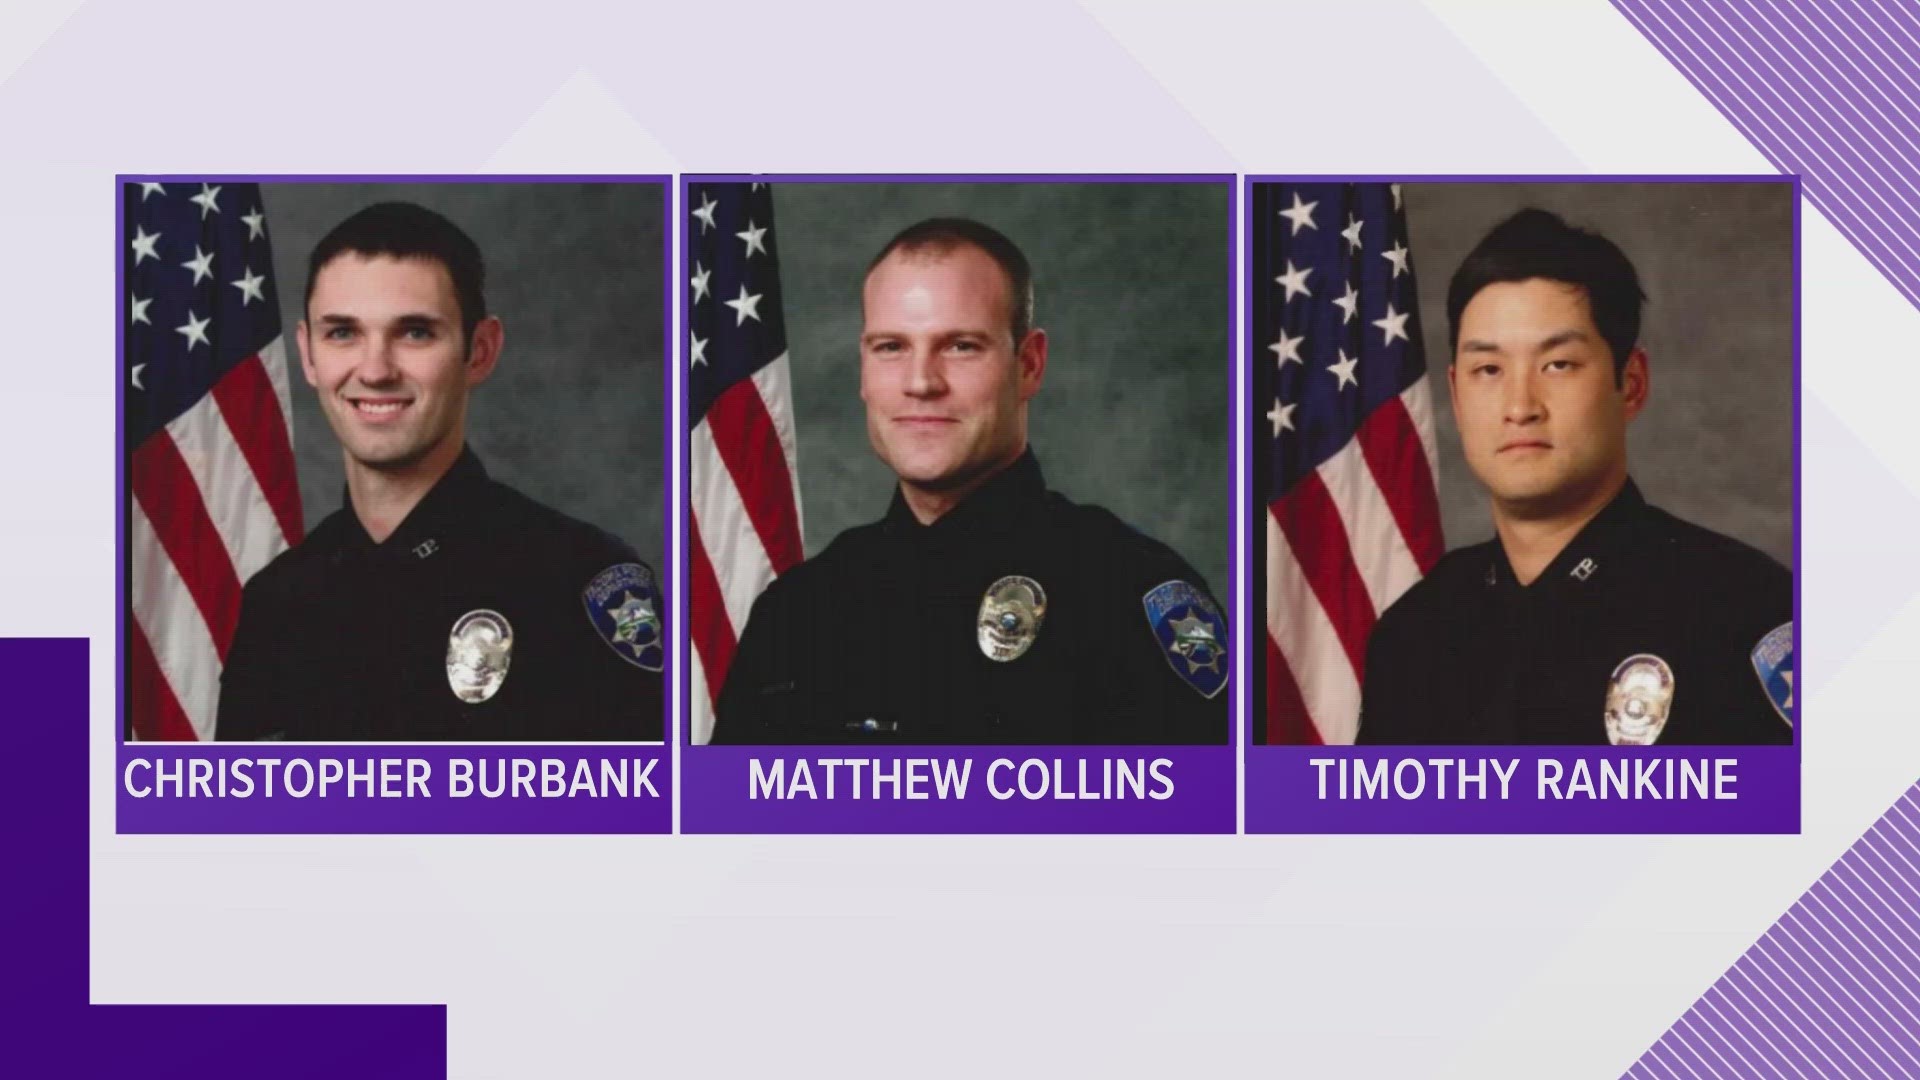 Their attorneys confirmed to KING 5 that the officers were exonerated of wrongdoing by a TPD internal affairs investigation.